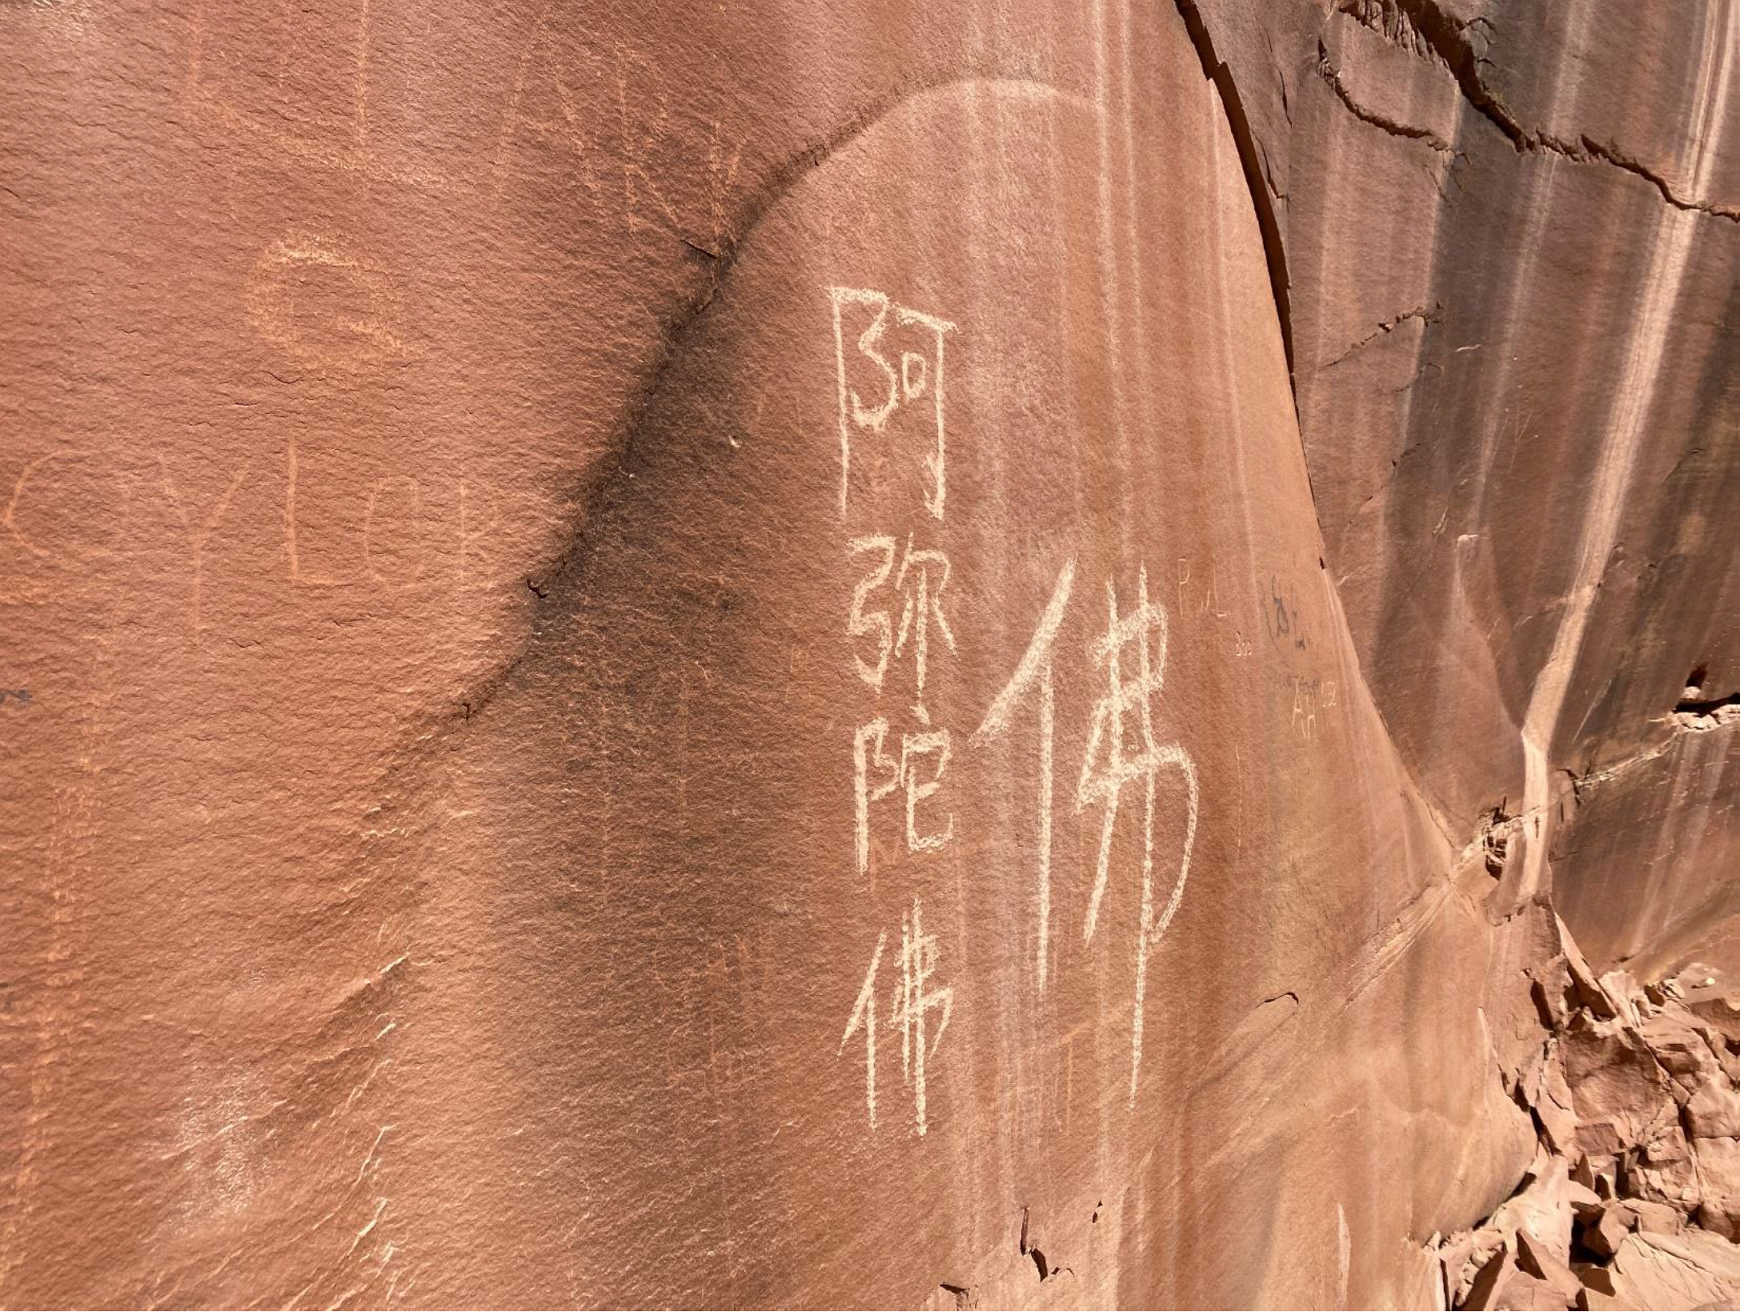 Characters carved into a rock wall stand out brightly next to historic inscriptions